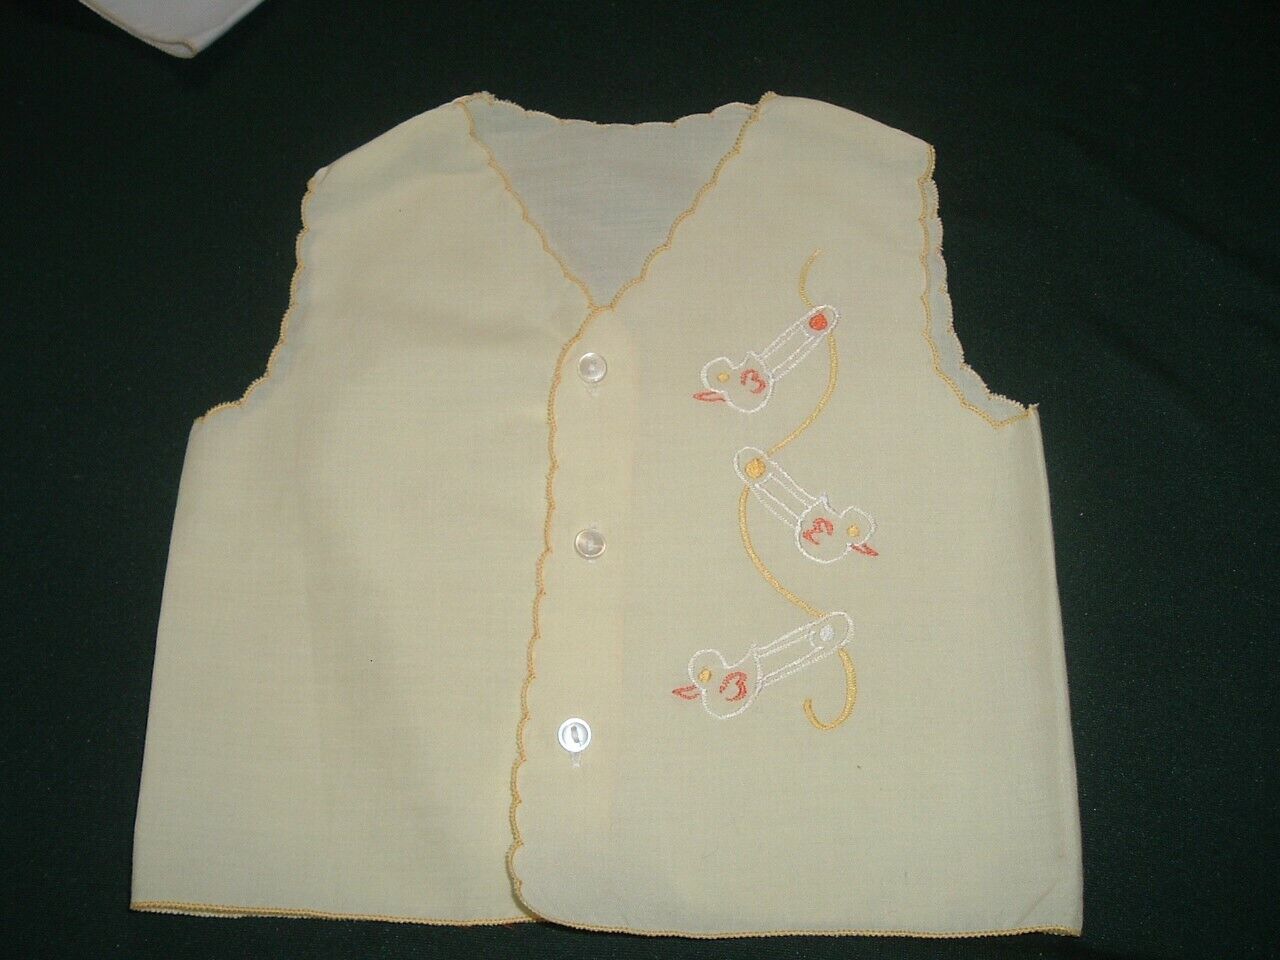  Vtg 1960s Boys Embroidered Yellow Ducks Summer Top Vest Shirt Dime Store #PB11